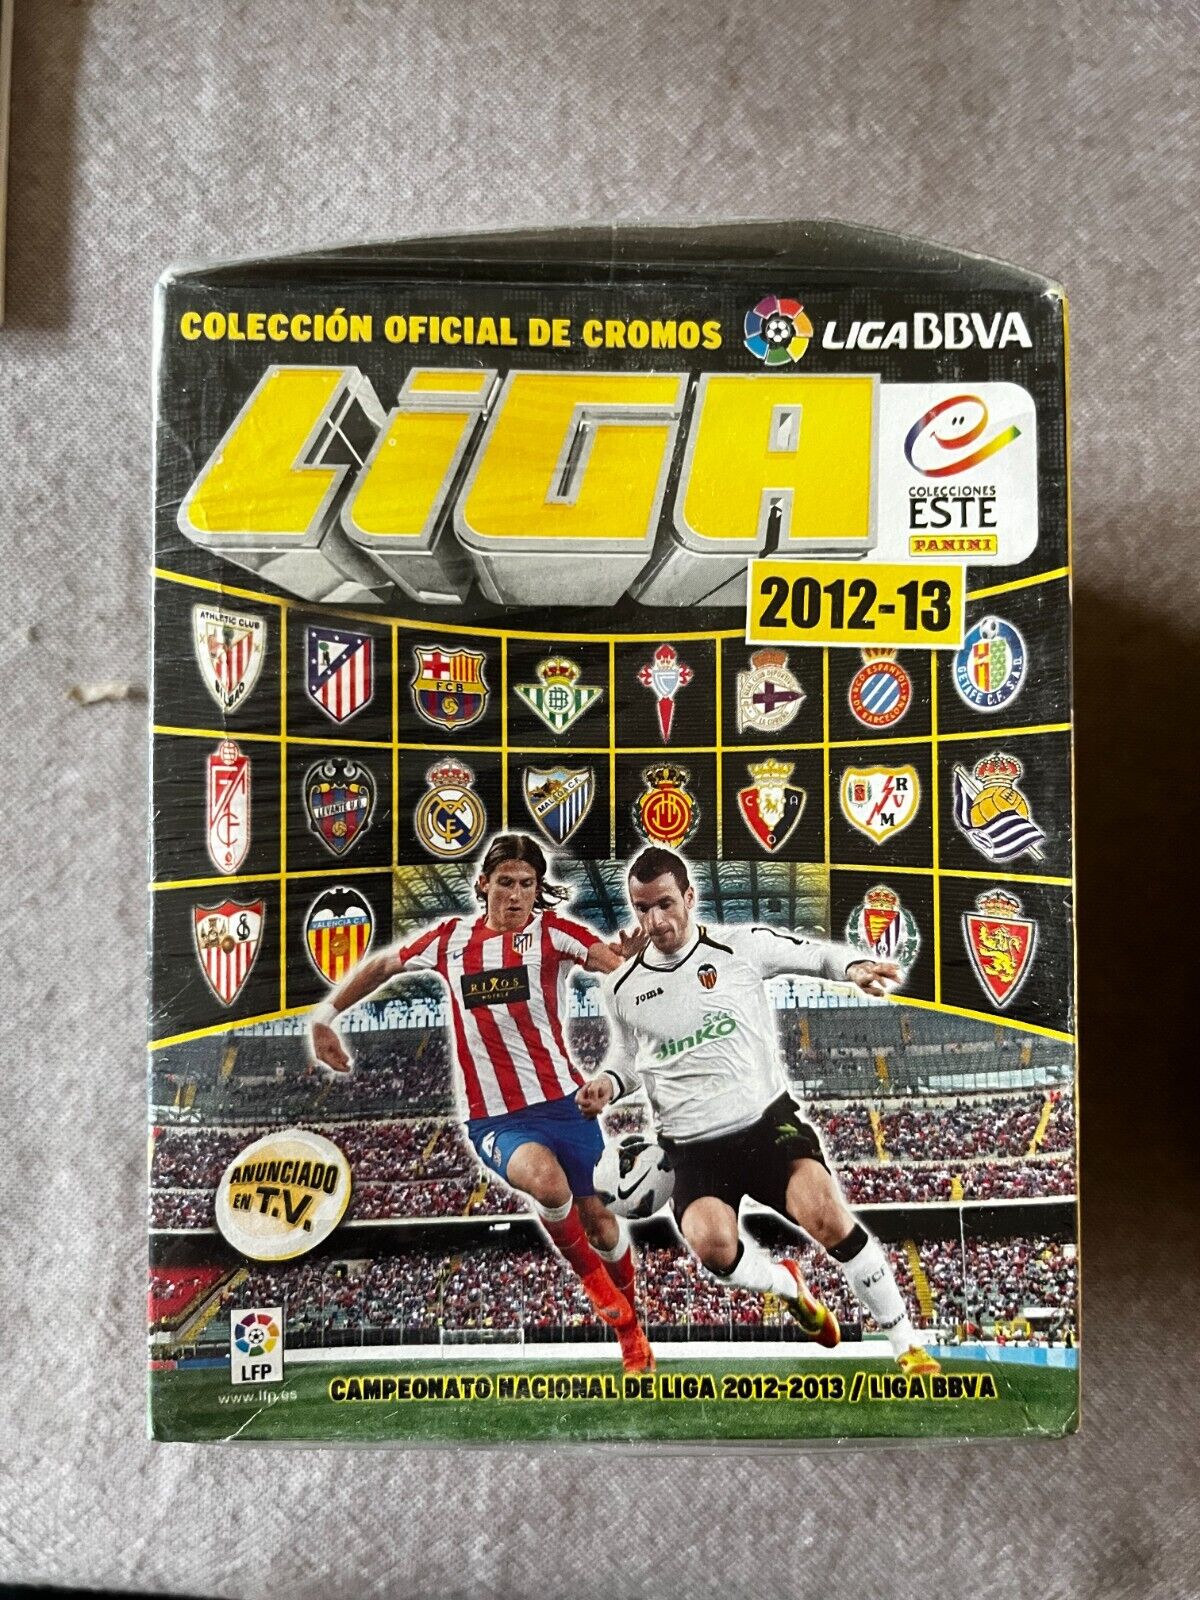 DISPLAY BOX 50 PACKET SEALED LEAGUE 2012/13 BBVA COLLECTIONS ESTE VERY RARE PANINI